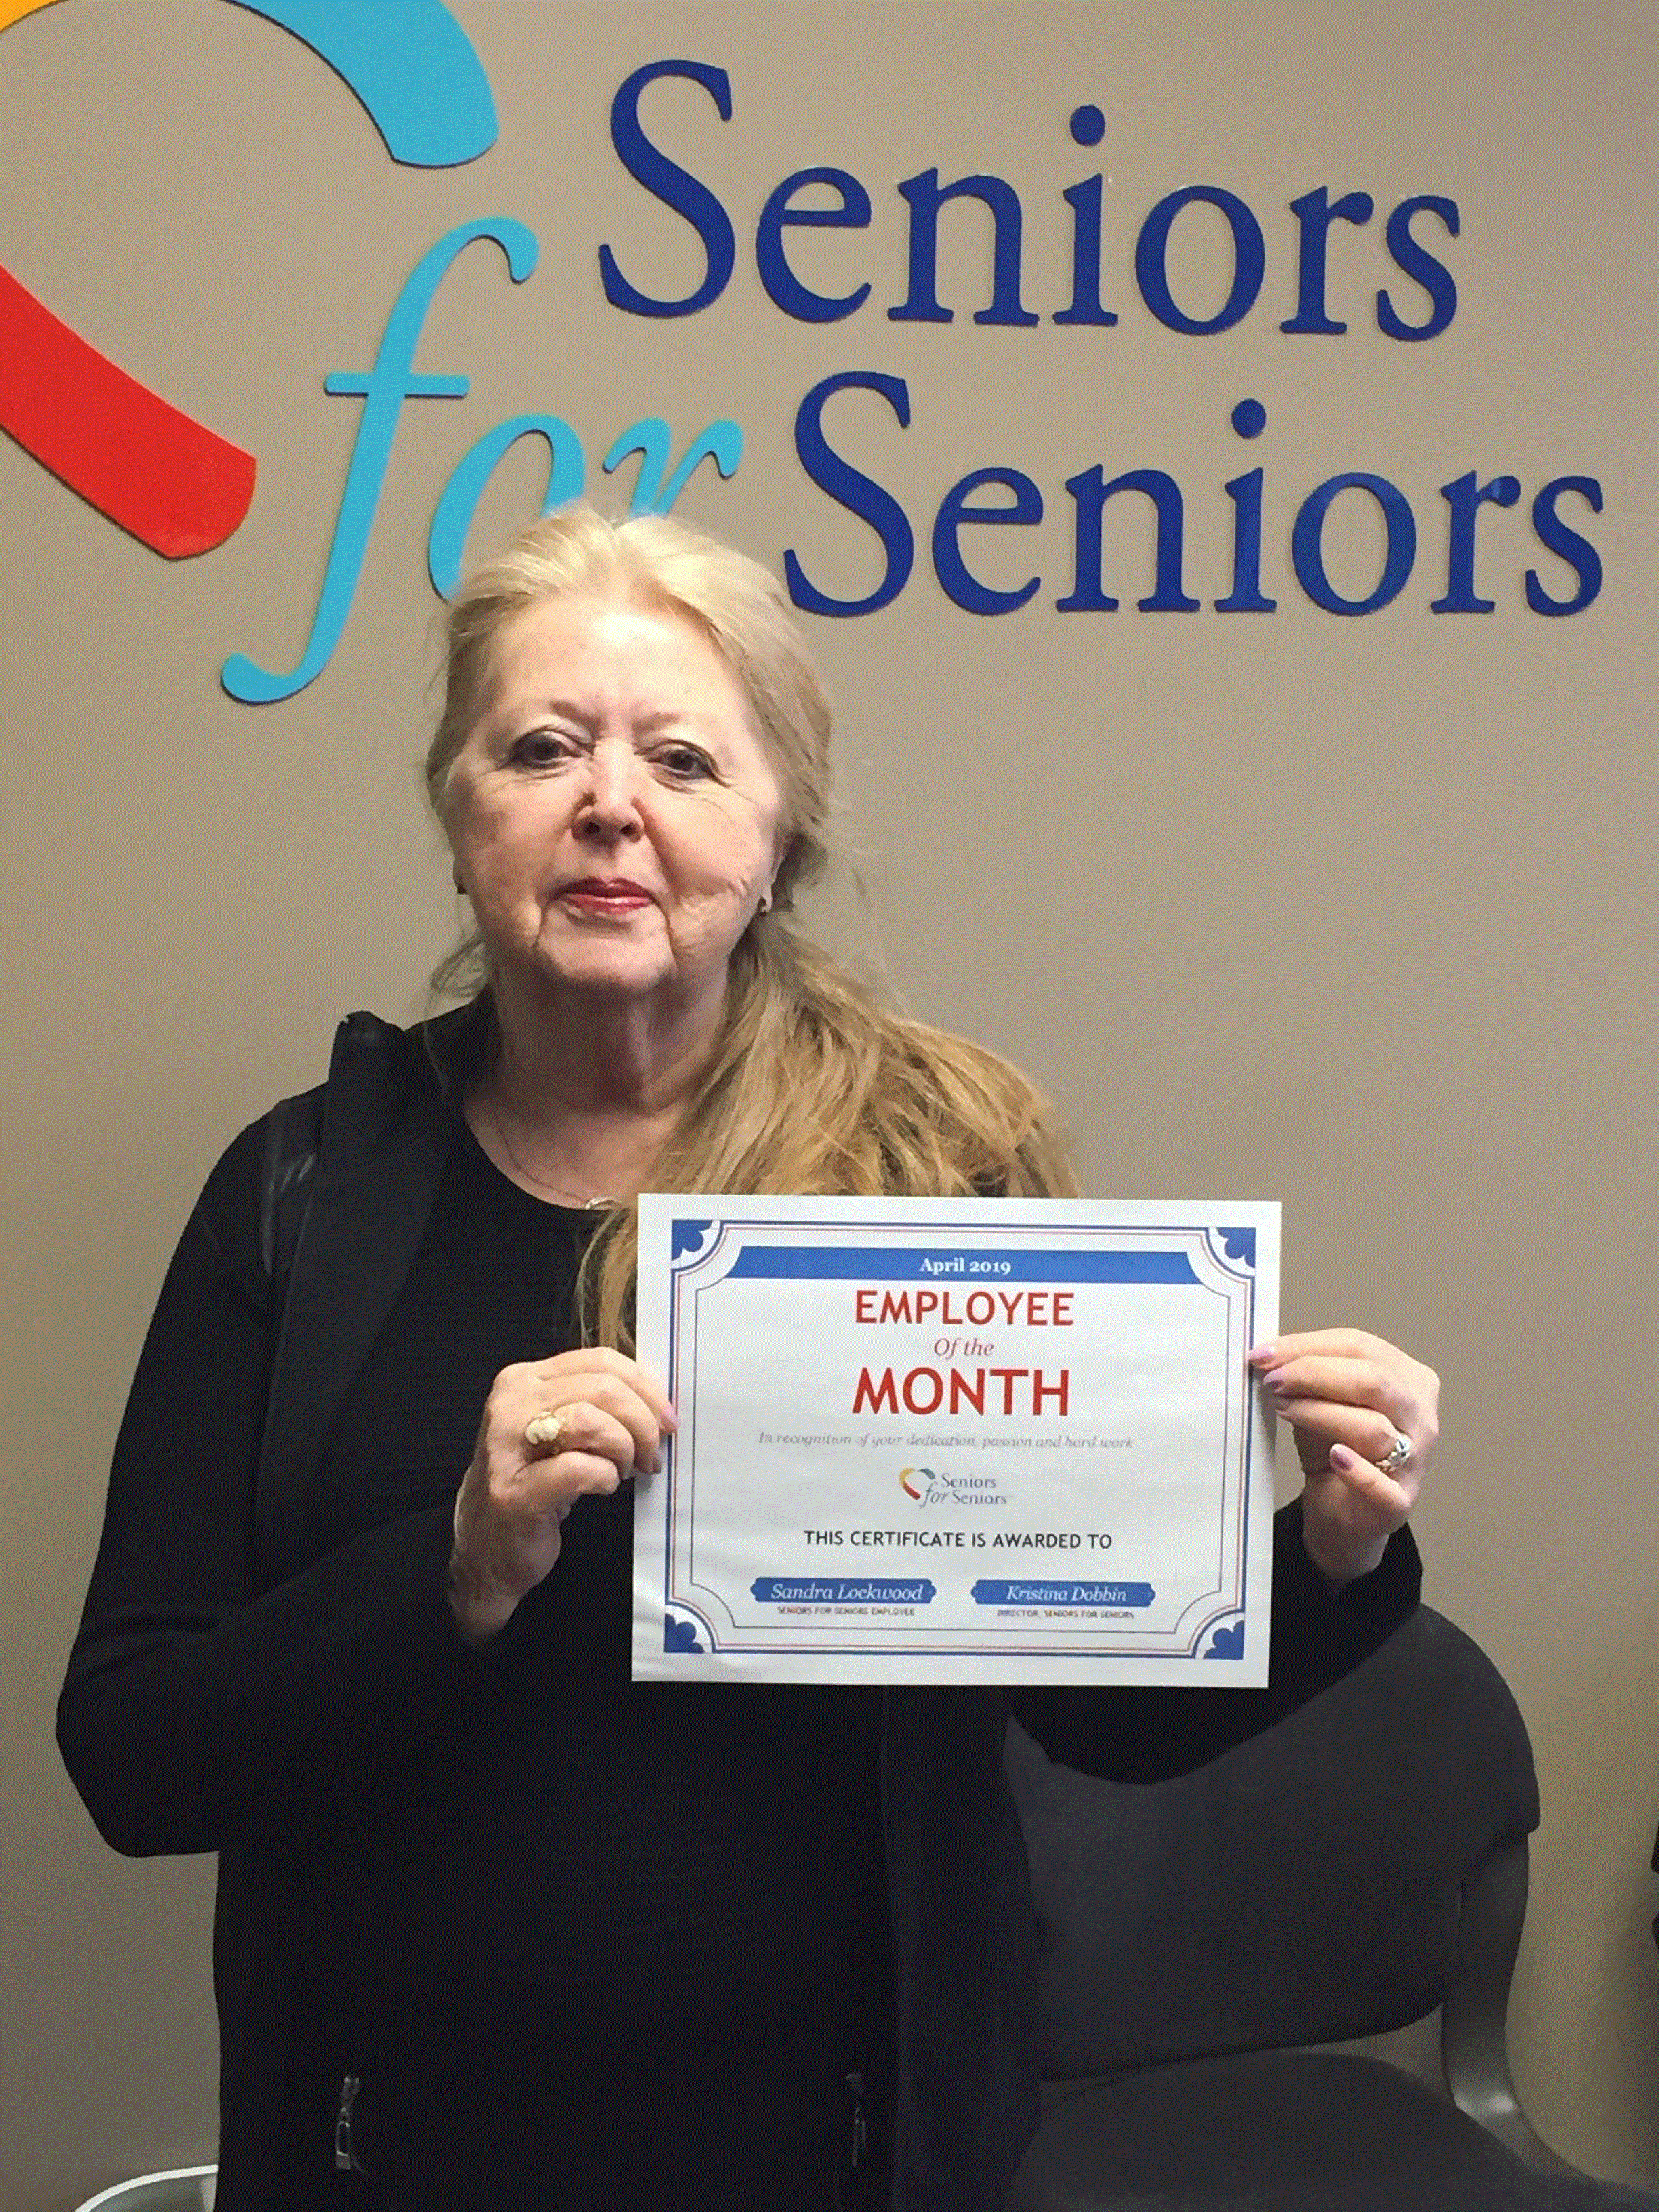 Image: Our April Employee of the Month is Sandra!